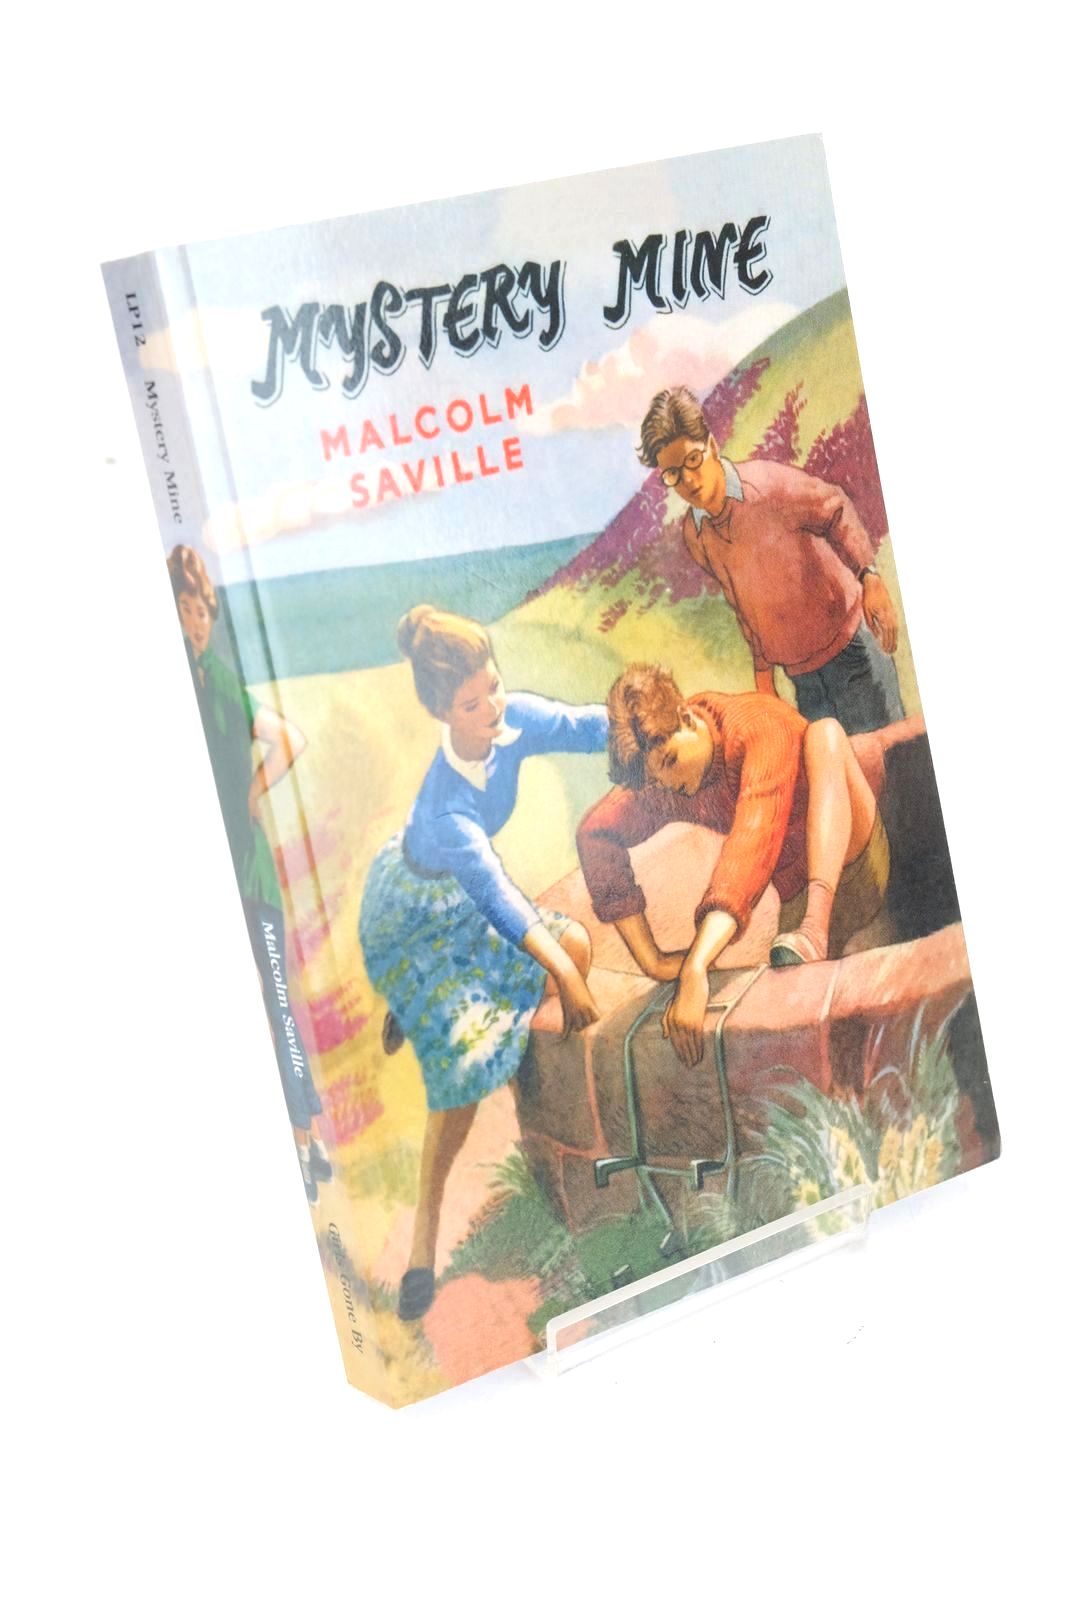 Photo of MYSTERY MINE written by Saville, Malcolm illustrated by Freeman, Terry published by Girls Gone By (STOCK CODE: 1325441)  for sale by Stella & Rose's Books